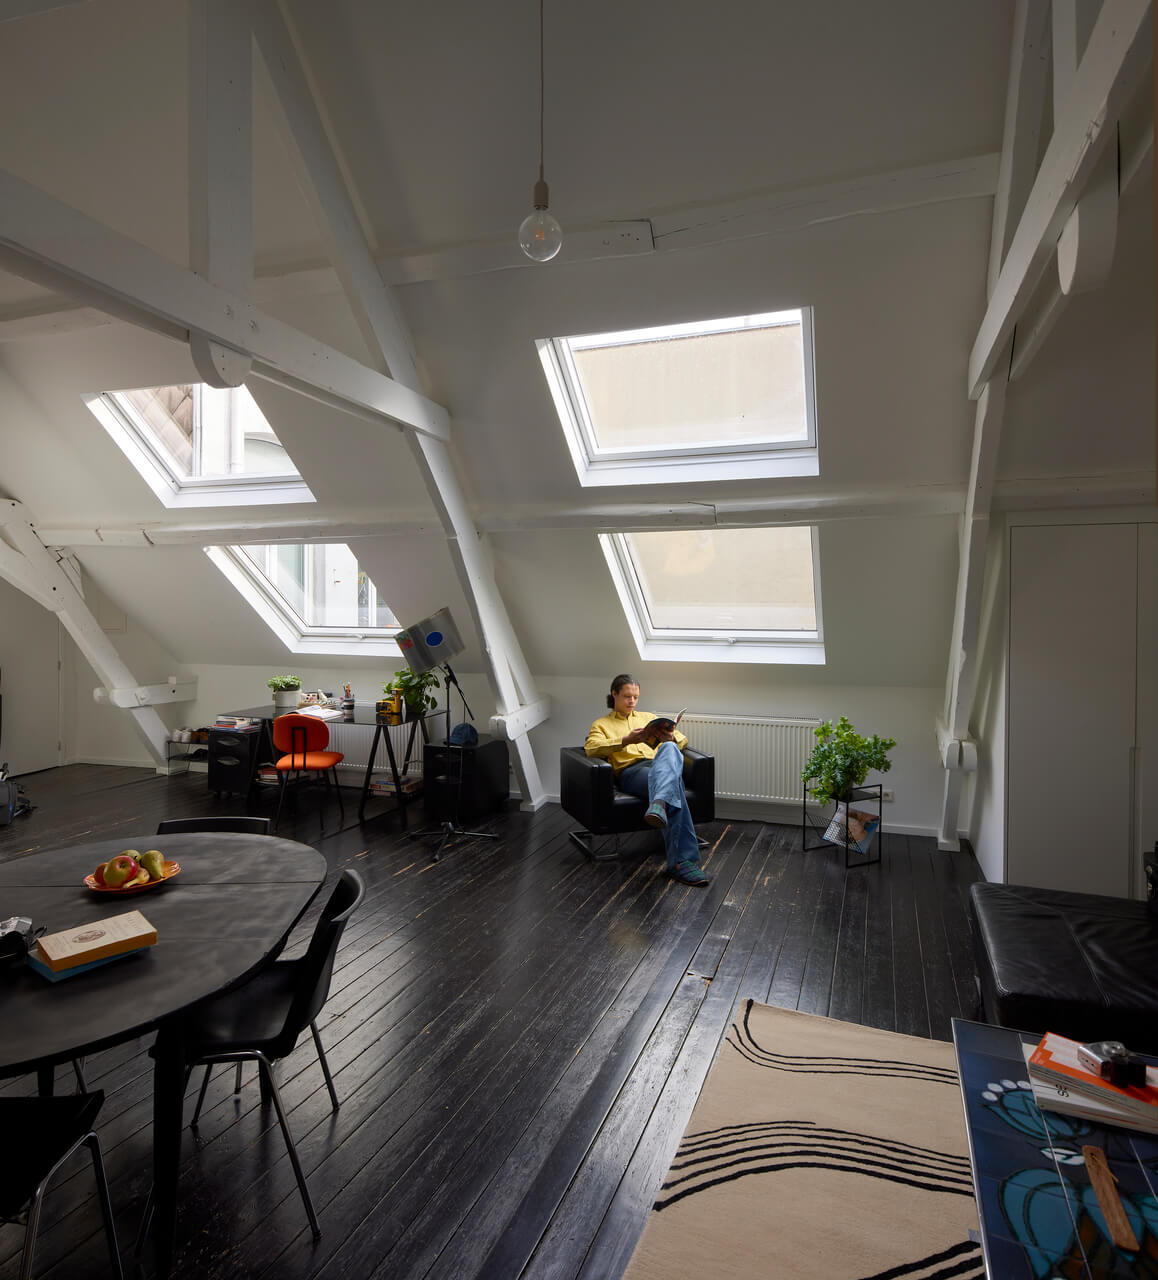 An attic area with a person sitting by the roof window.